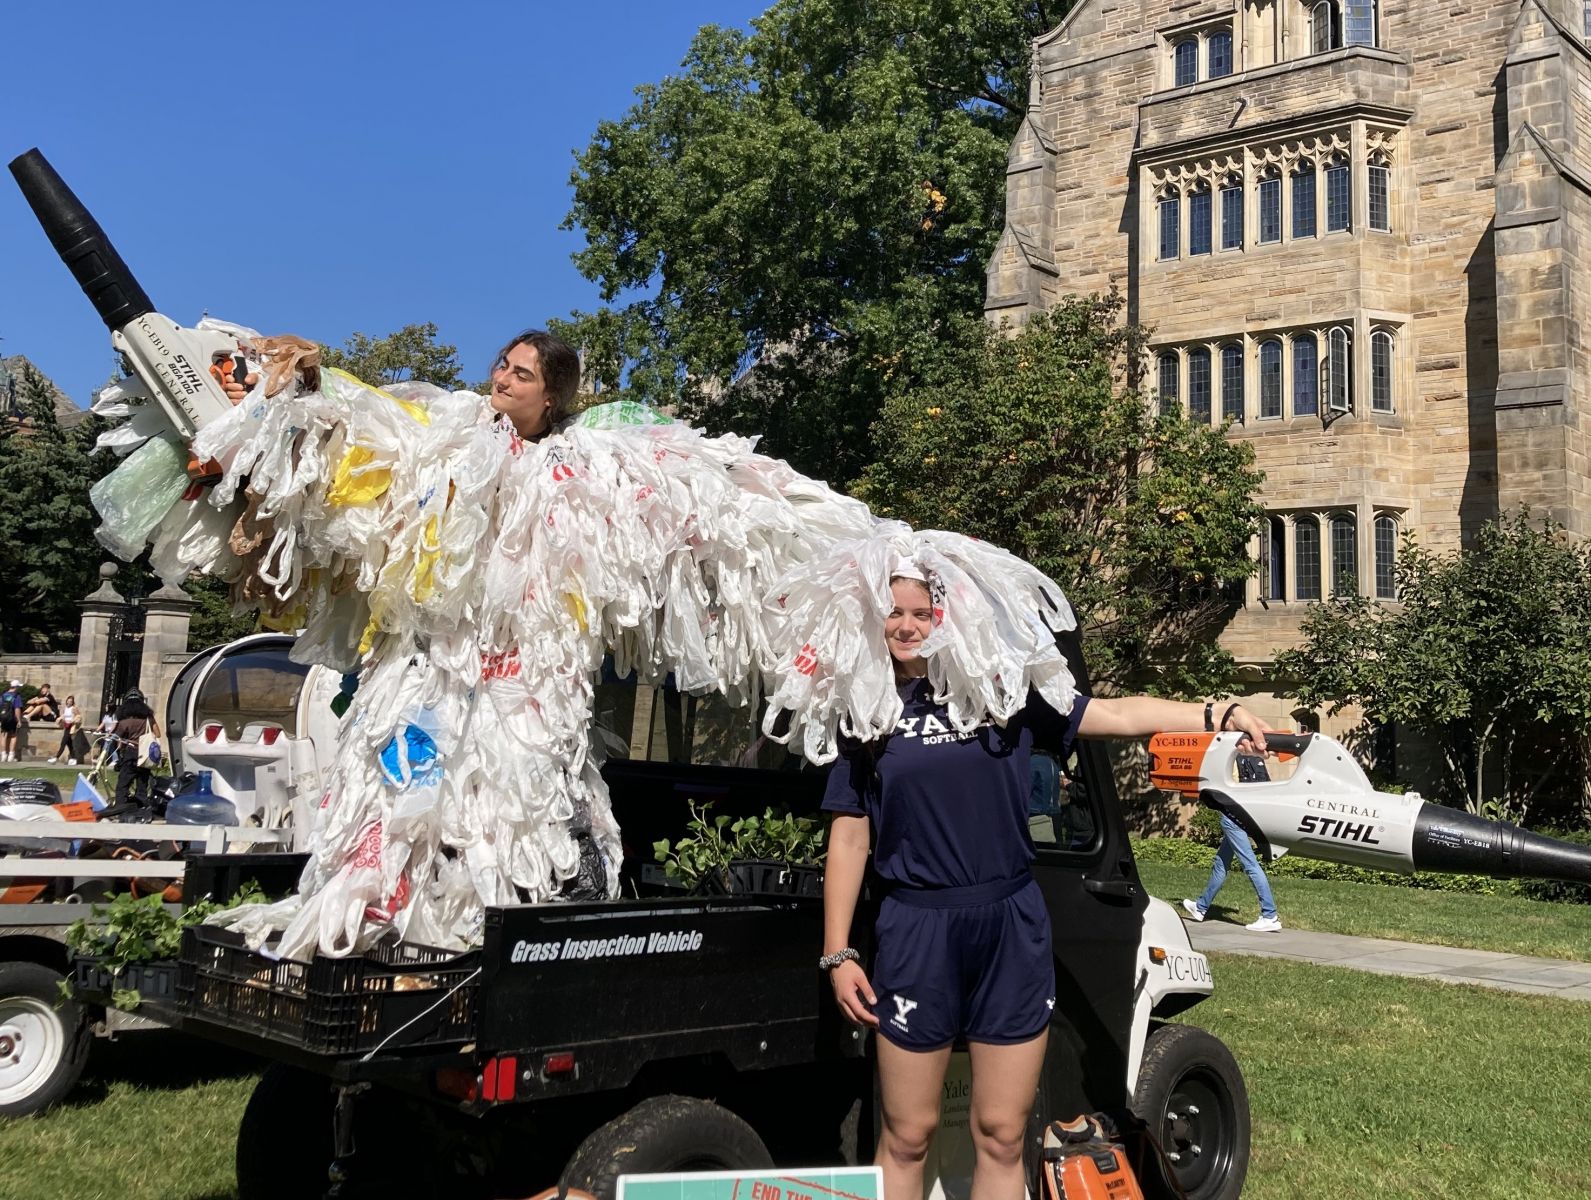 Photo of Yale students dressed in 'bag monster' costume